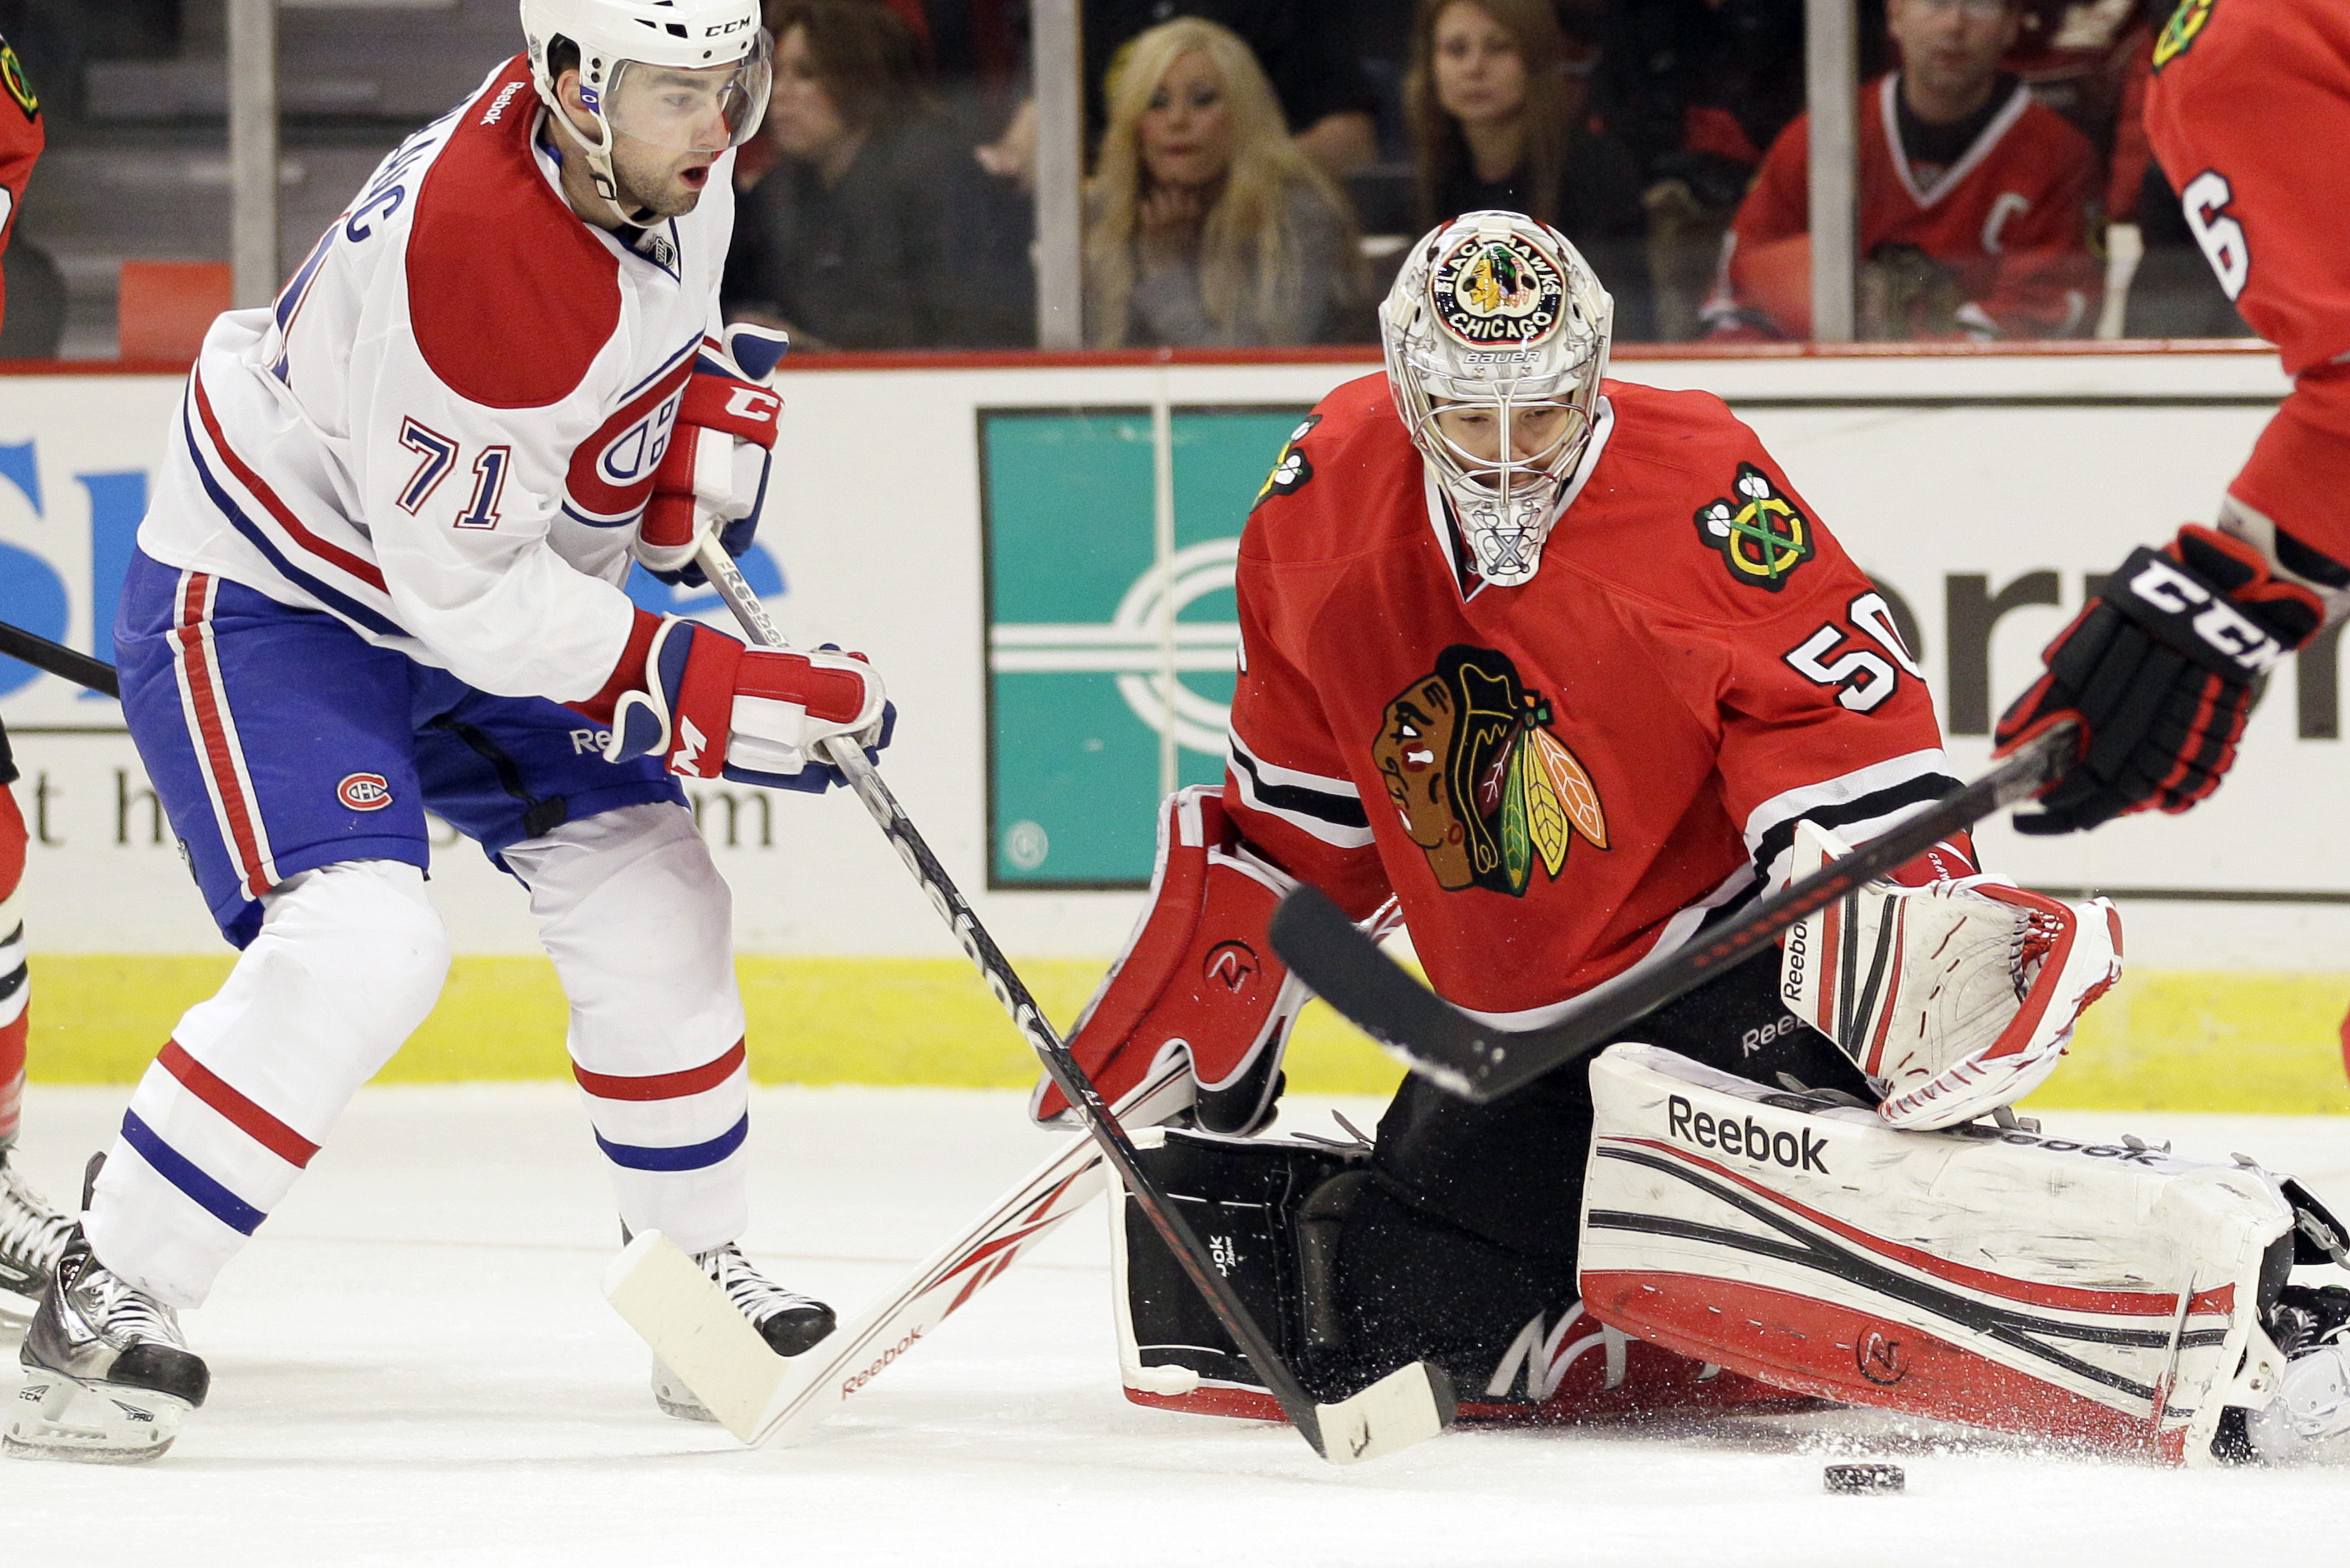 Corey Crawford's Potential Absence Impacts New Jersey Devils' Plans